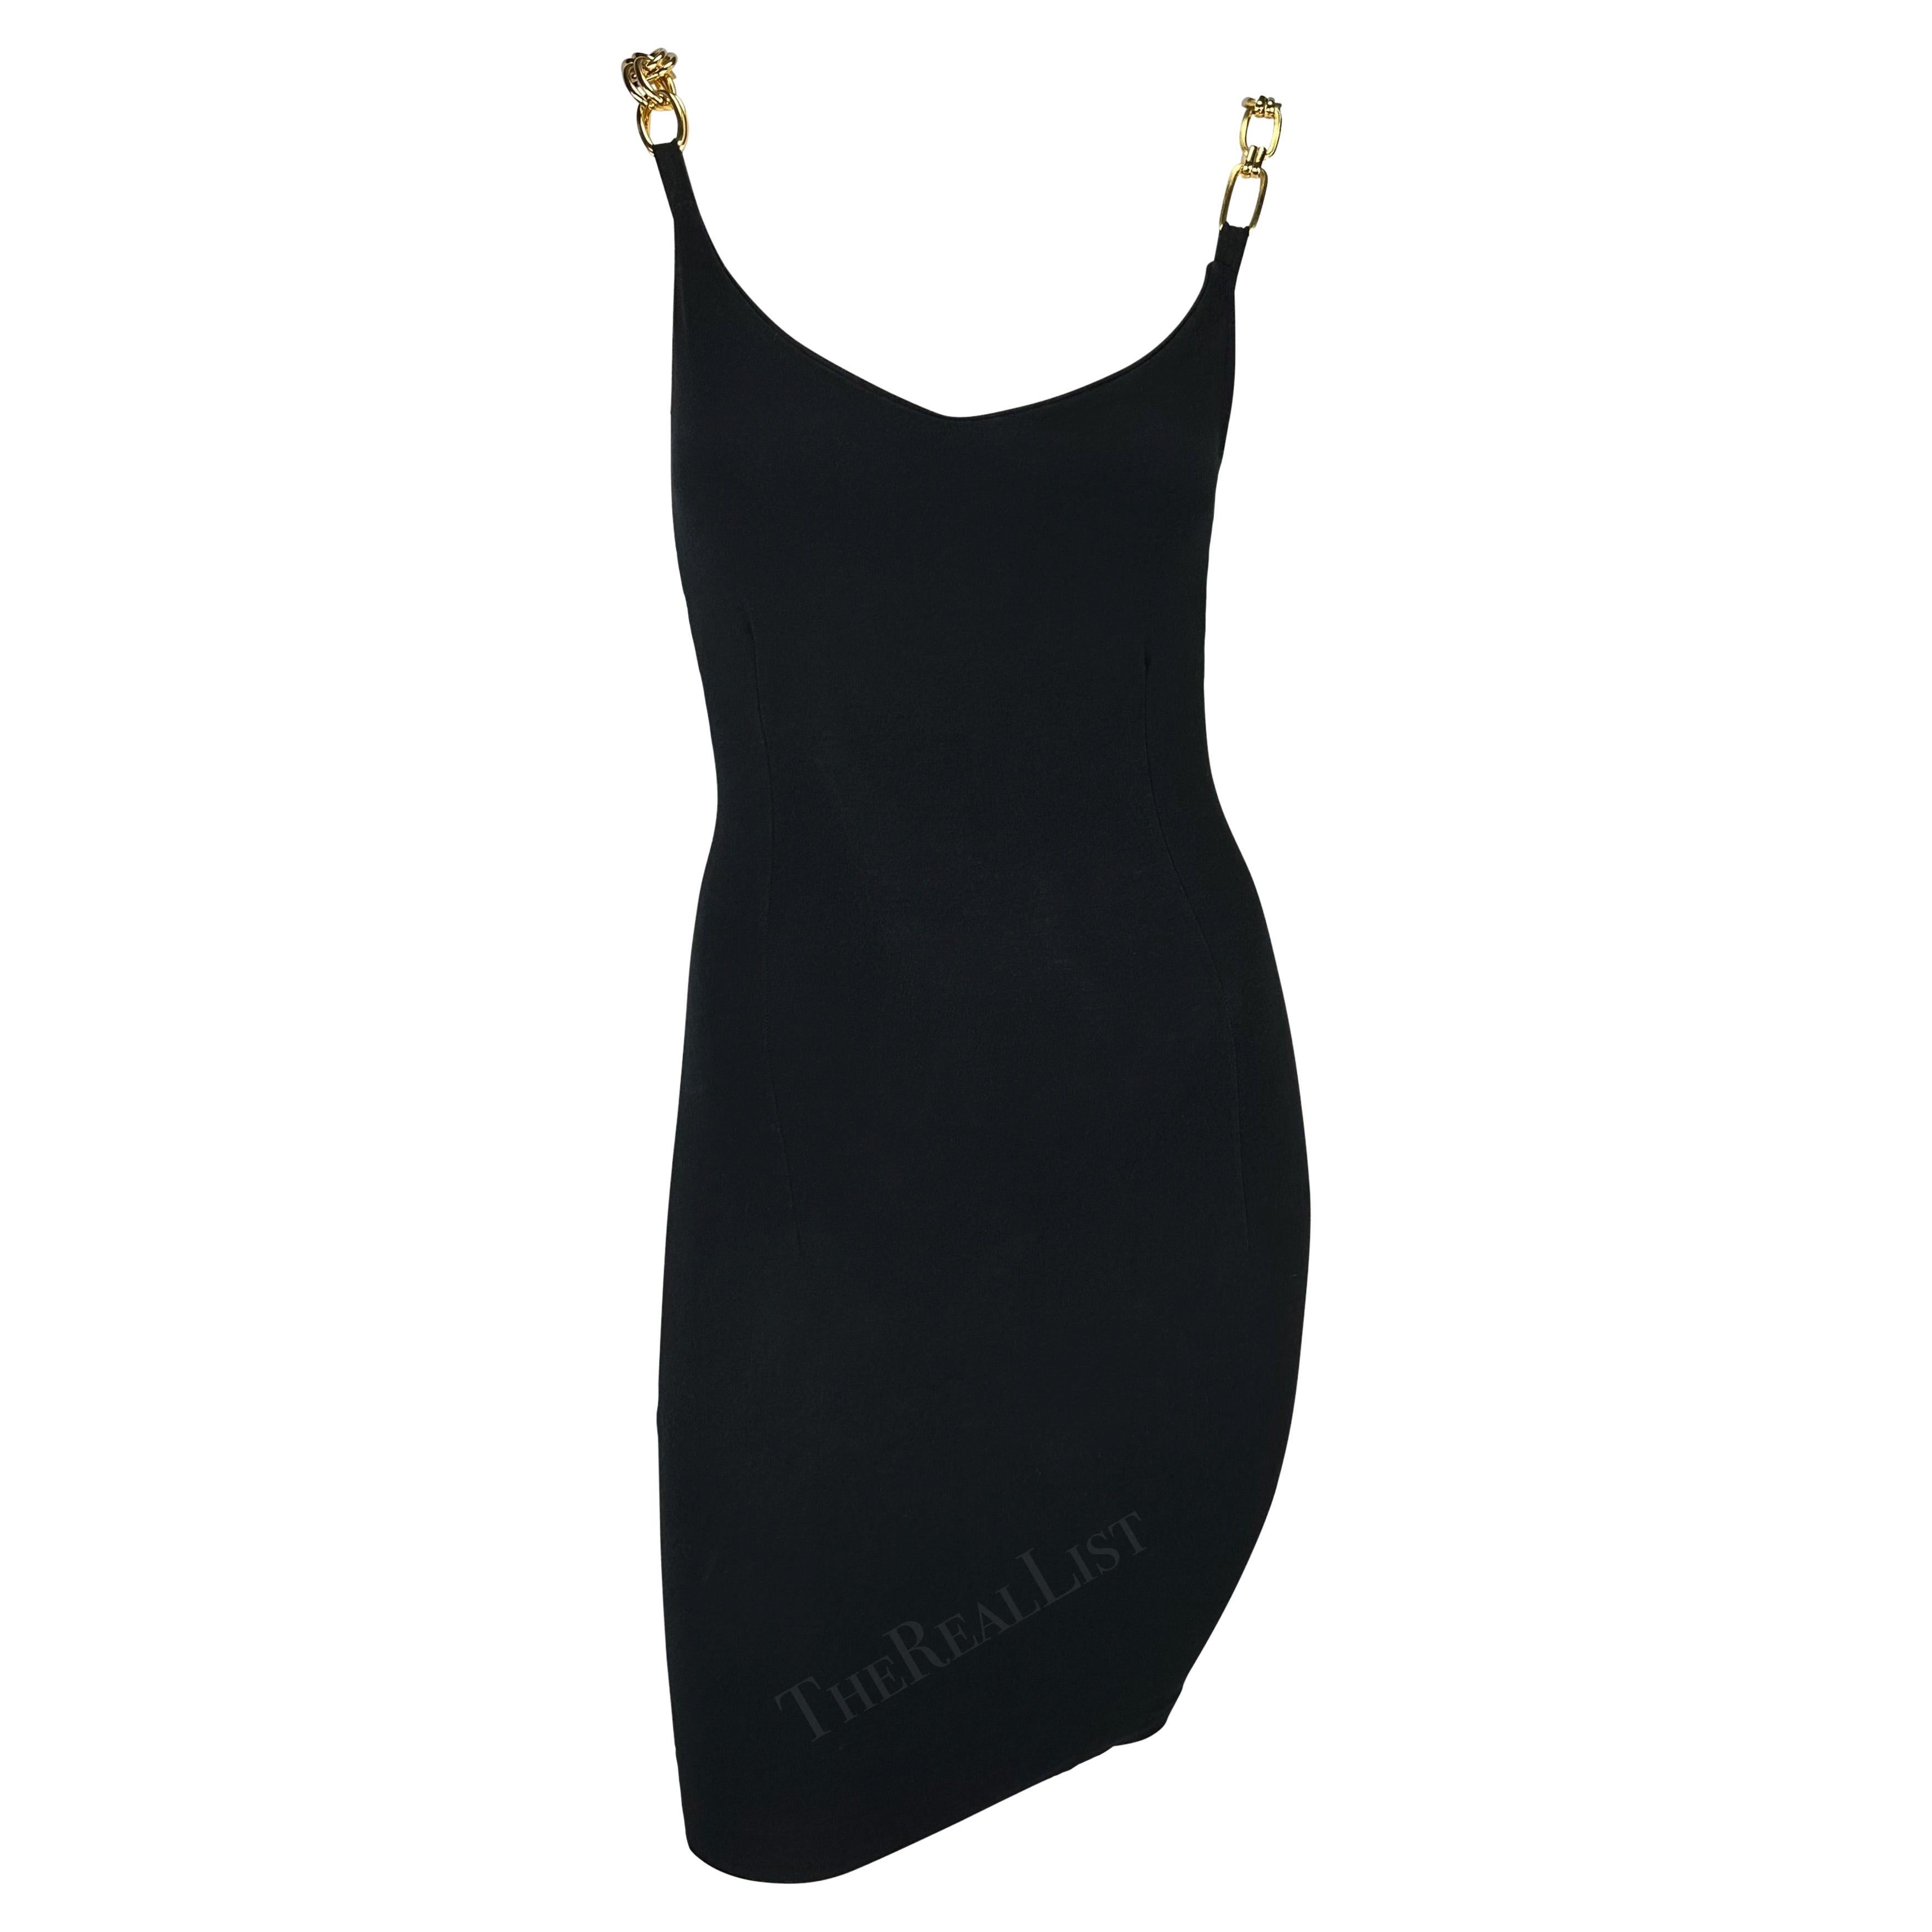 S/S 1991 Dolce & Gabbana Black Bodycon Gold Chain Strap Mini Dress In Excellent Condition For Sale In West Hollywood, CA